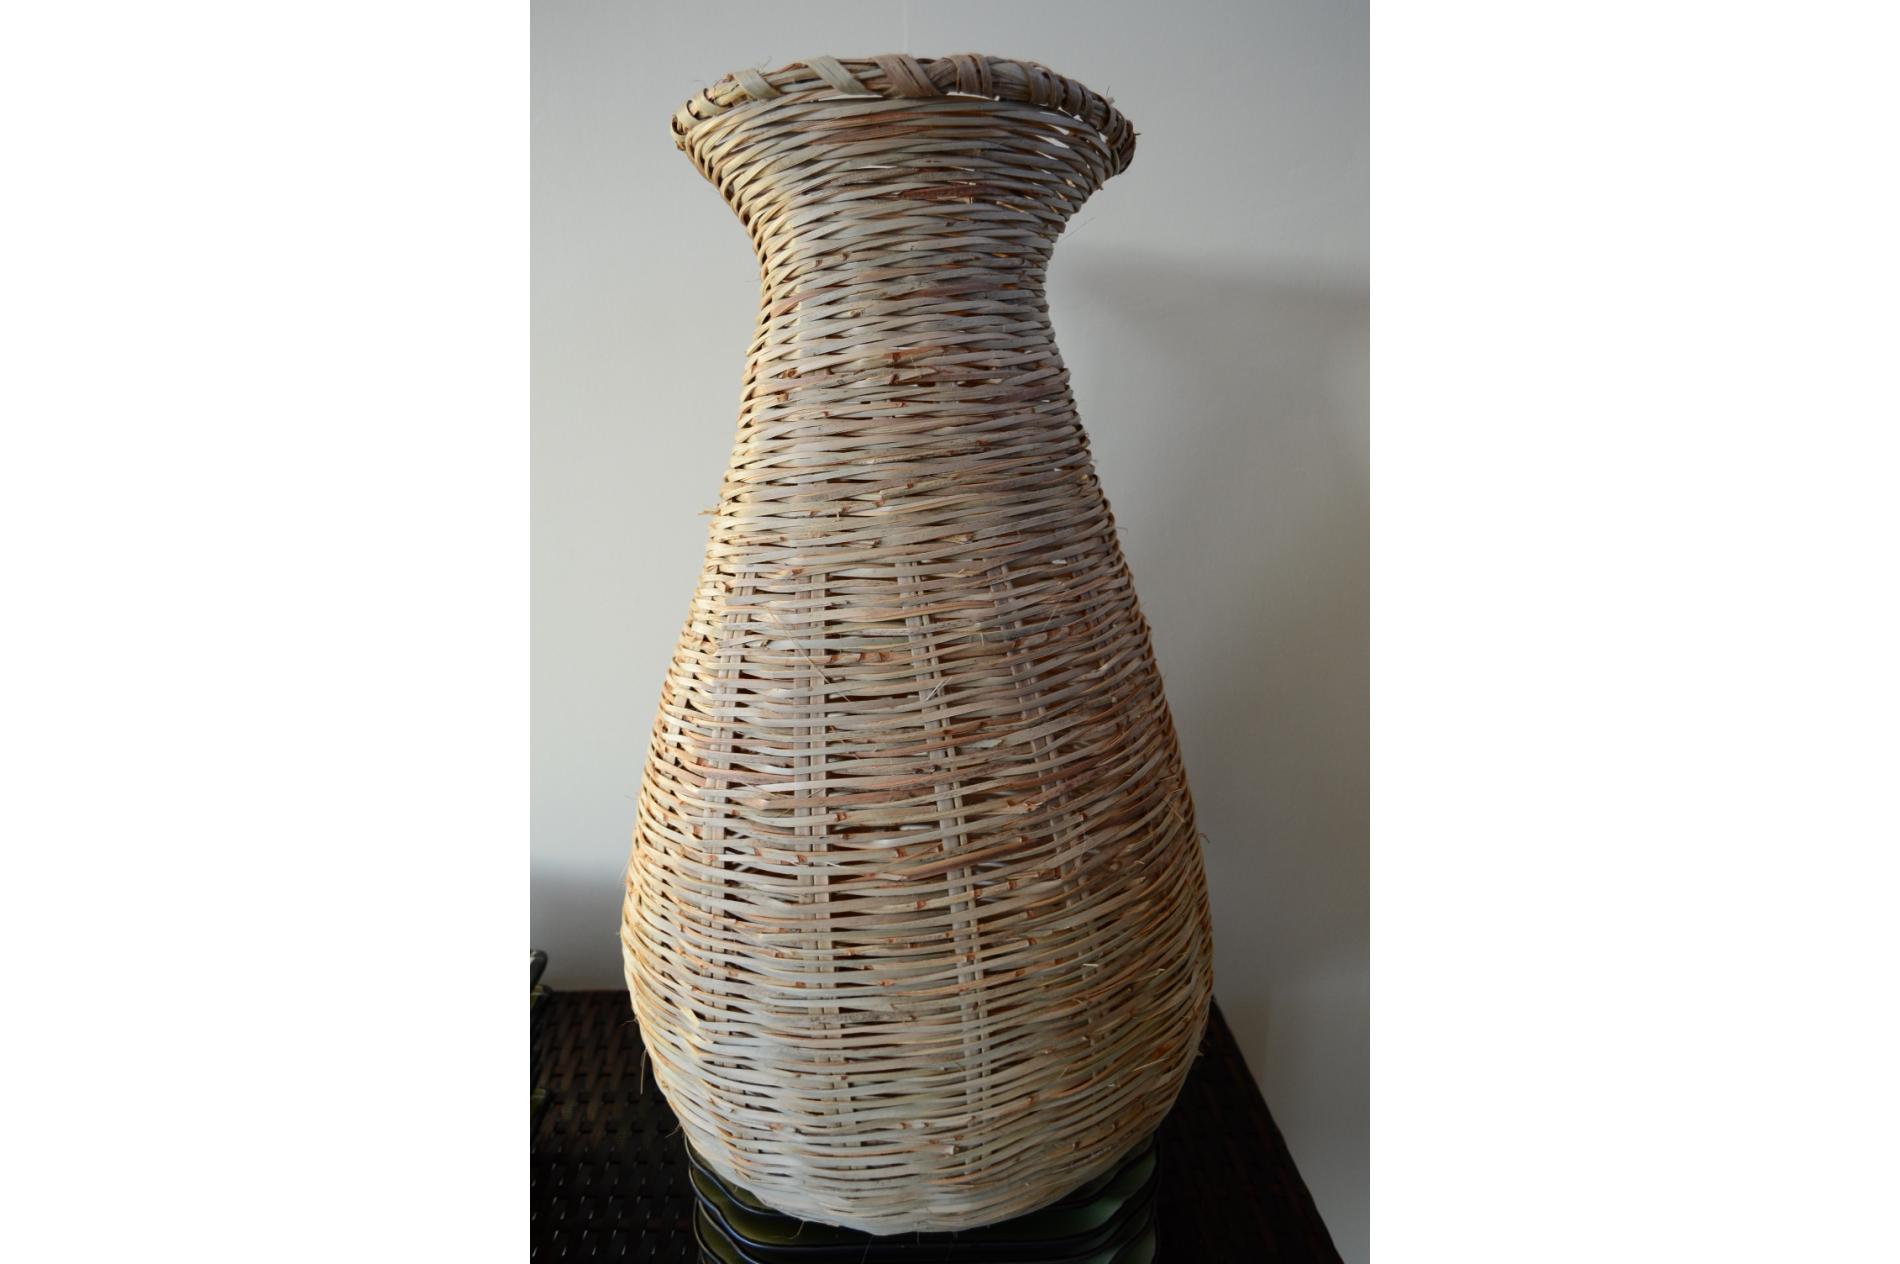 Tooro is particularly known for its basketry, welcome to the best of locally made crafts from our art and craft shop.